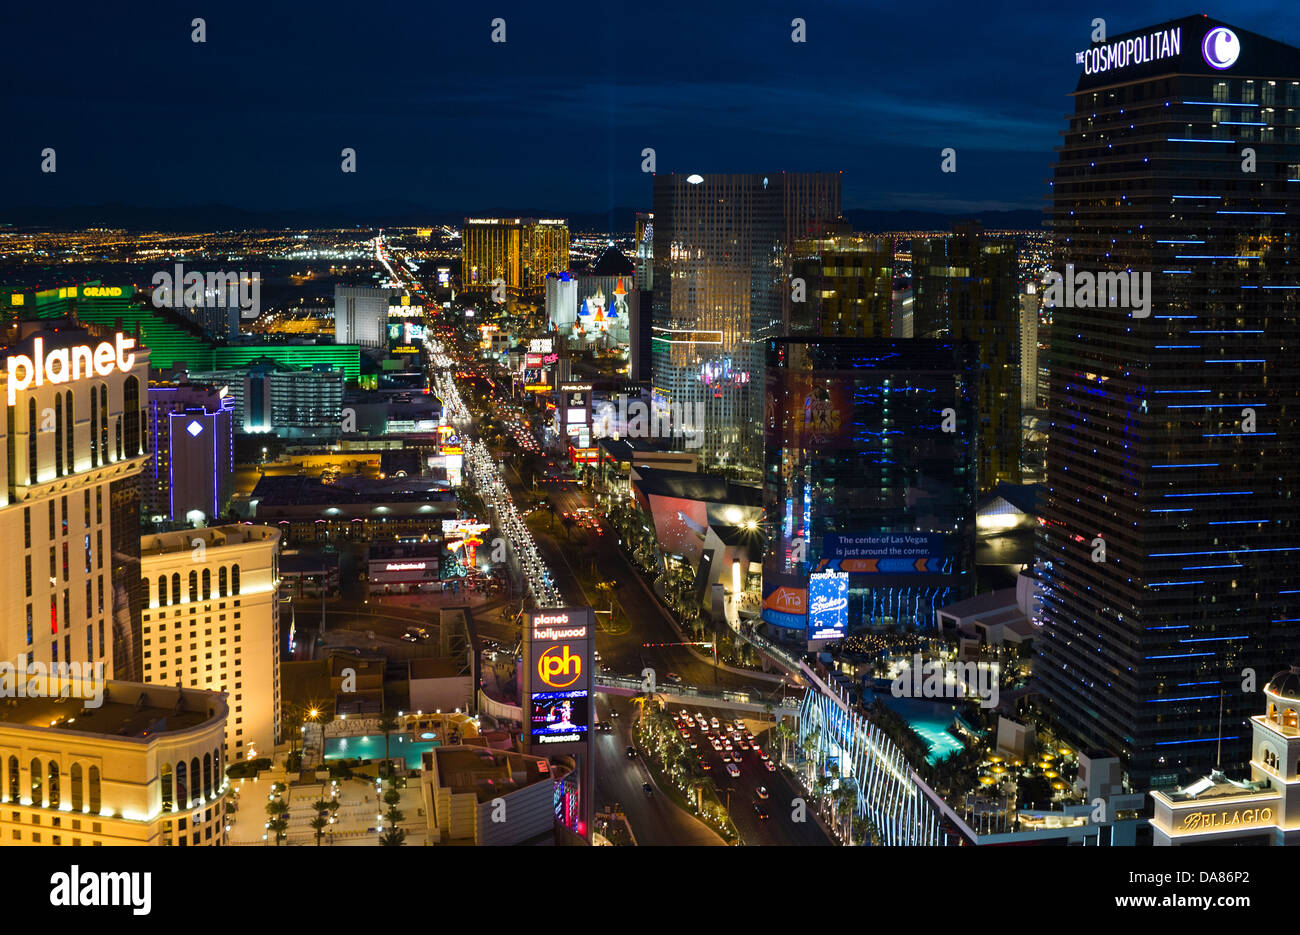 A view of the hotels and casinos on the Strip in Las Vegas, NV, USA, March 11, 2011. (Adrien Veczan) Stock Photo